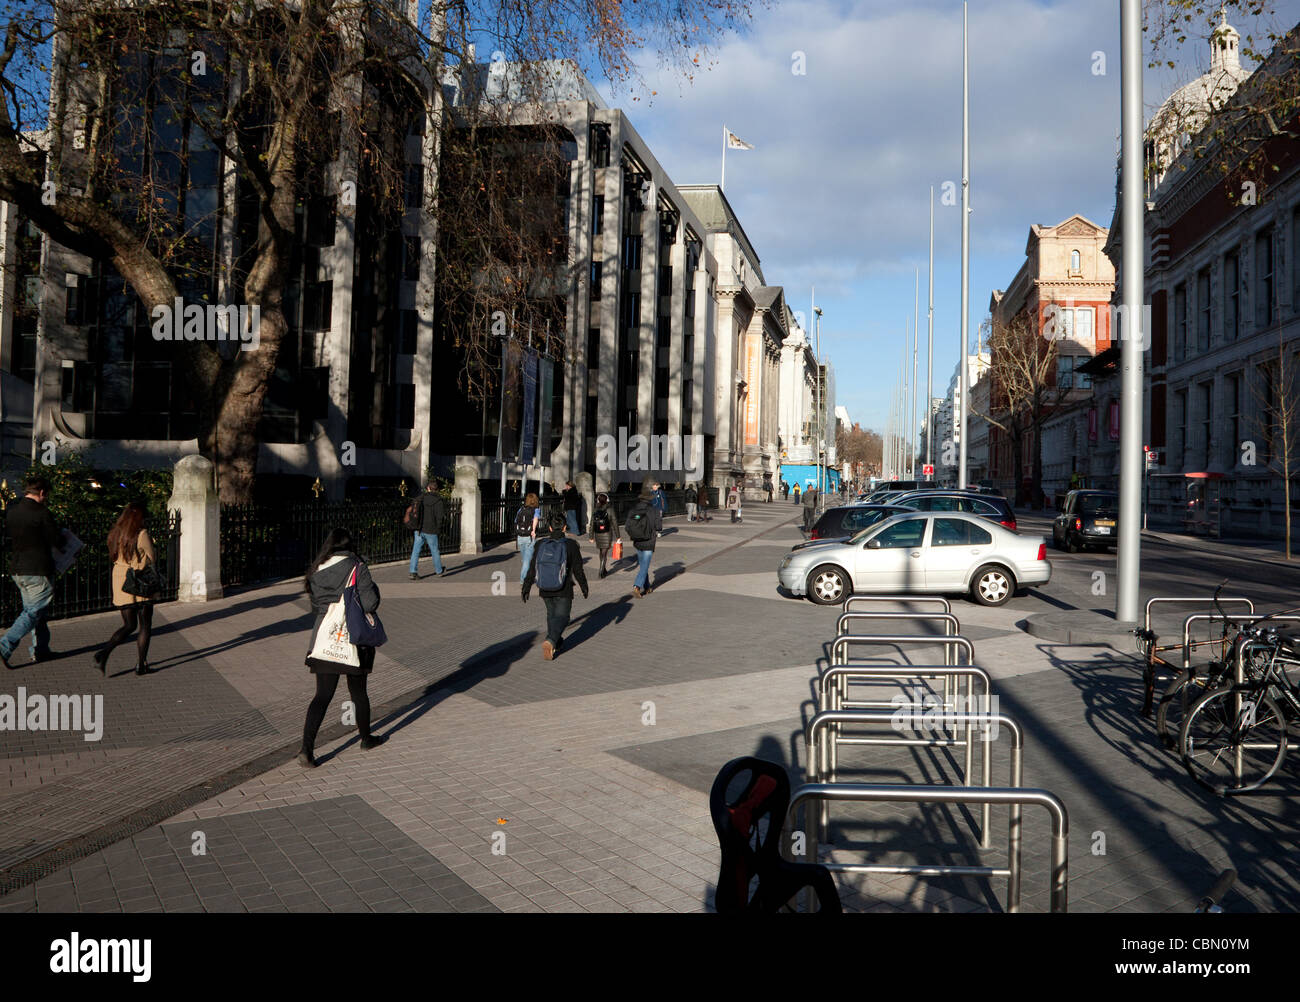 Shared space traffic scheme in Exhibition Road, South Kensington, London Stock Photo